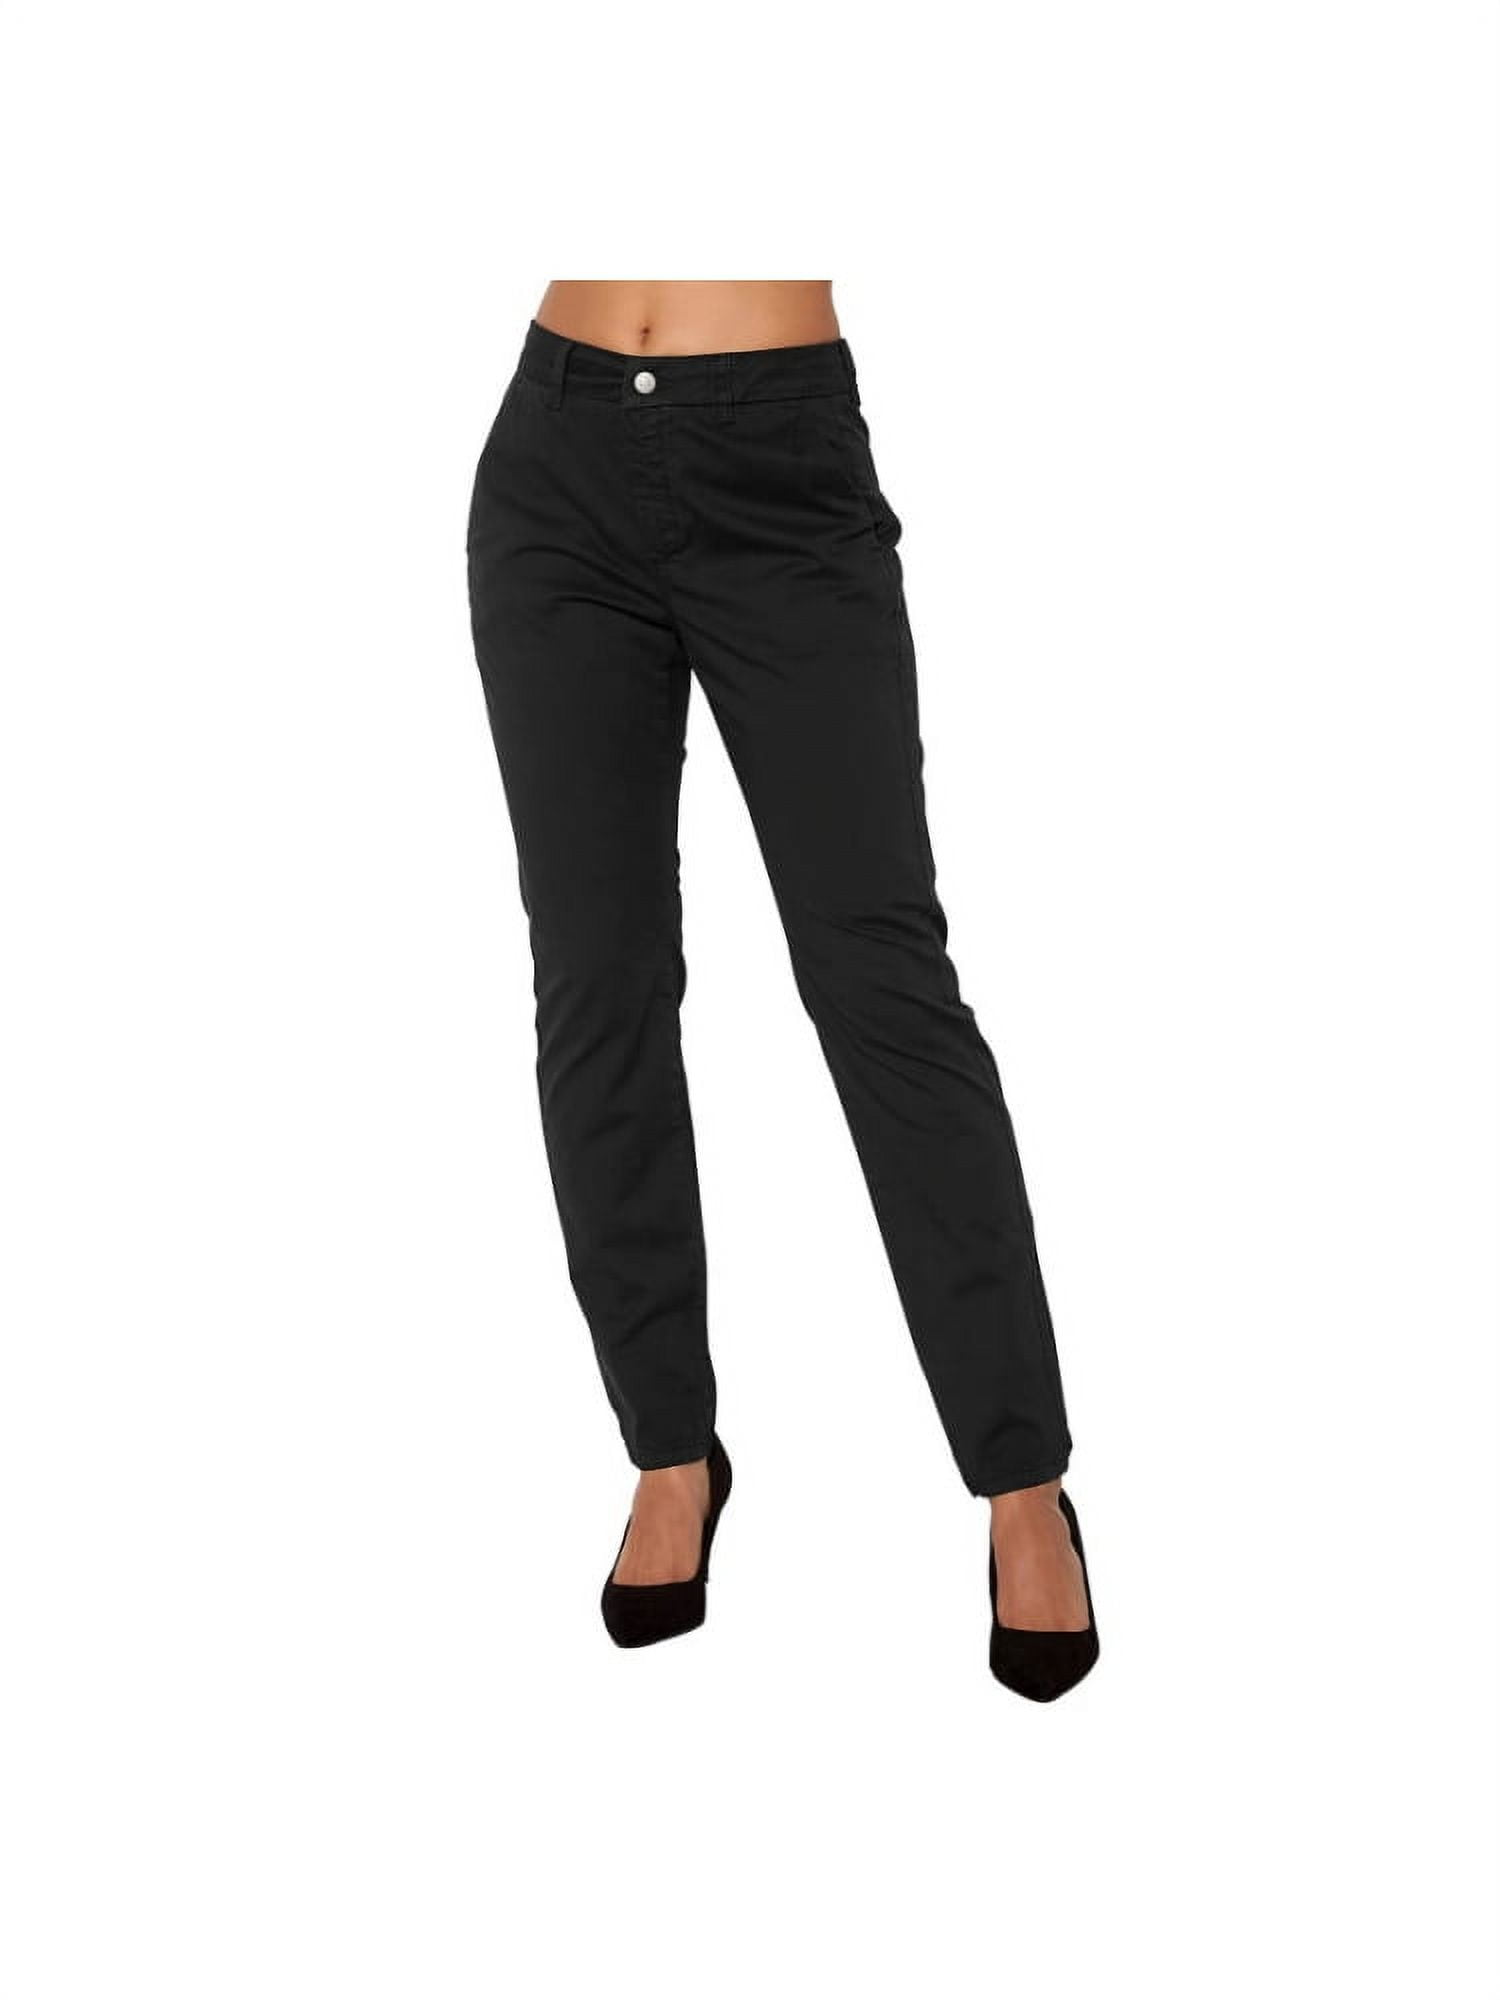 Women's Mid-Rise Cotton Casual Work Pants Daily Solid Color